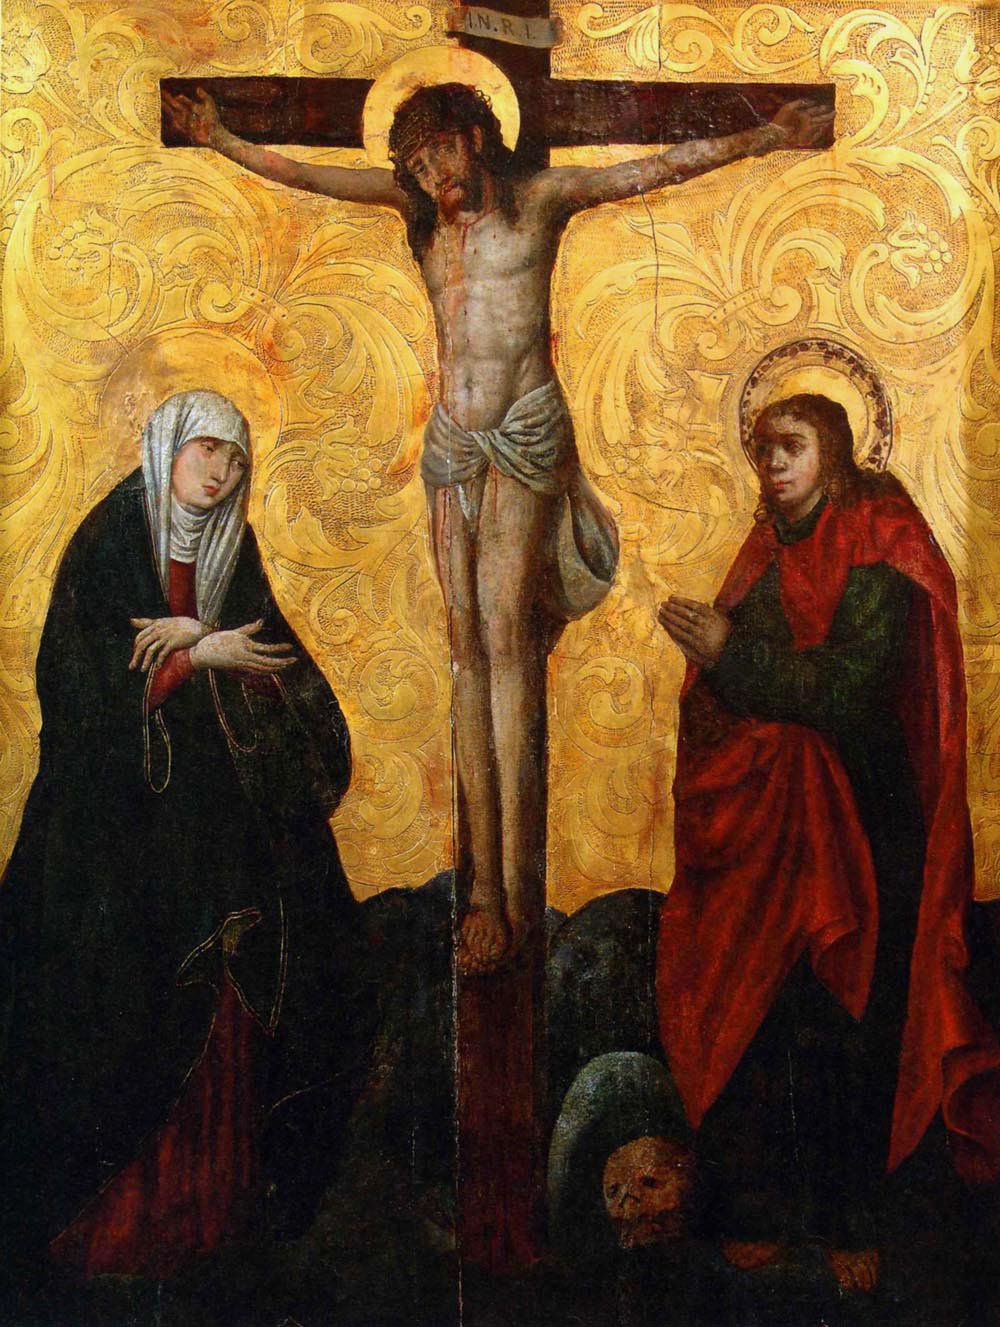 Crucifixion with Our Lady of Sorrows and St. John